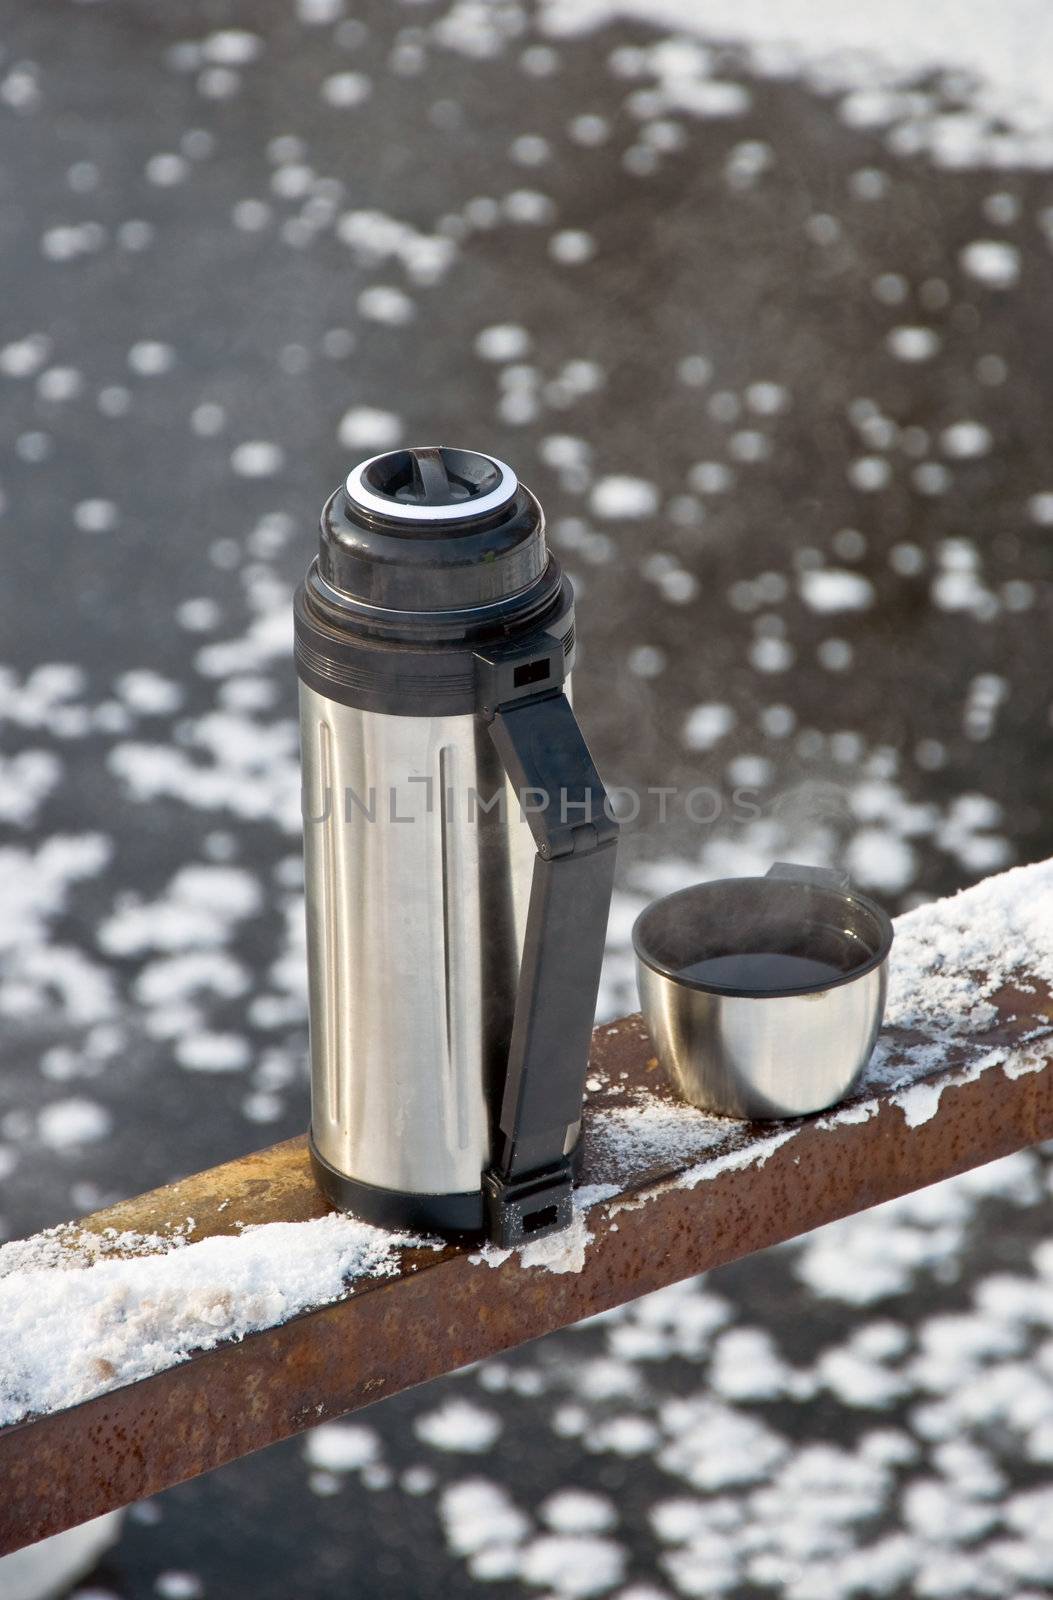 Metal thermos with hot tea drink. Winter.